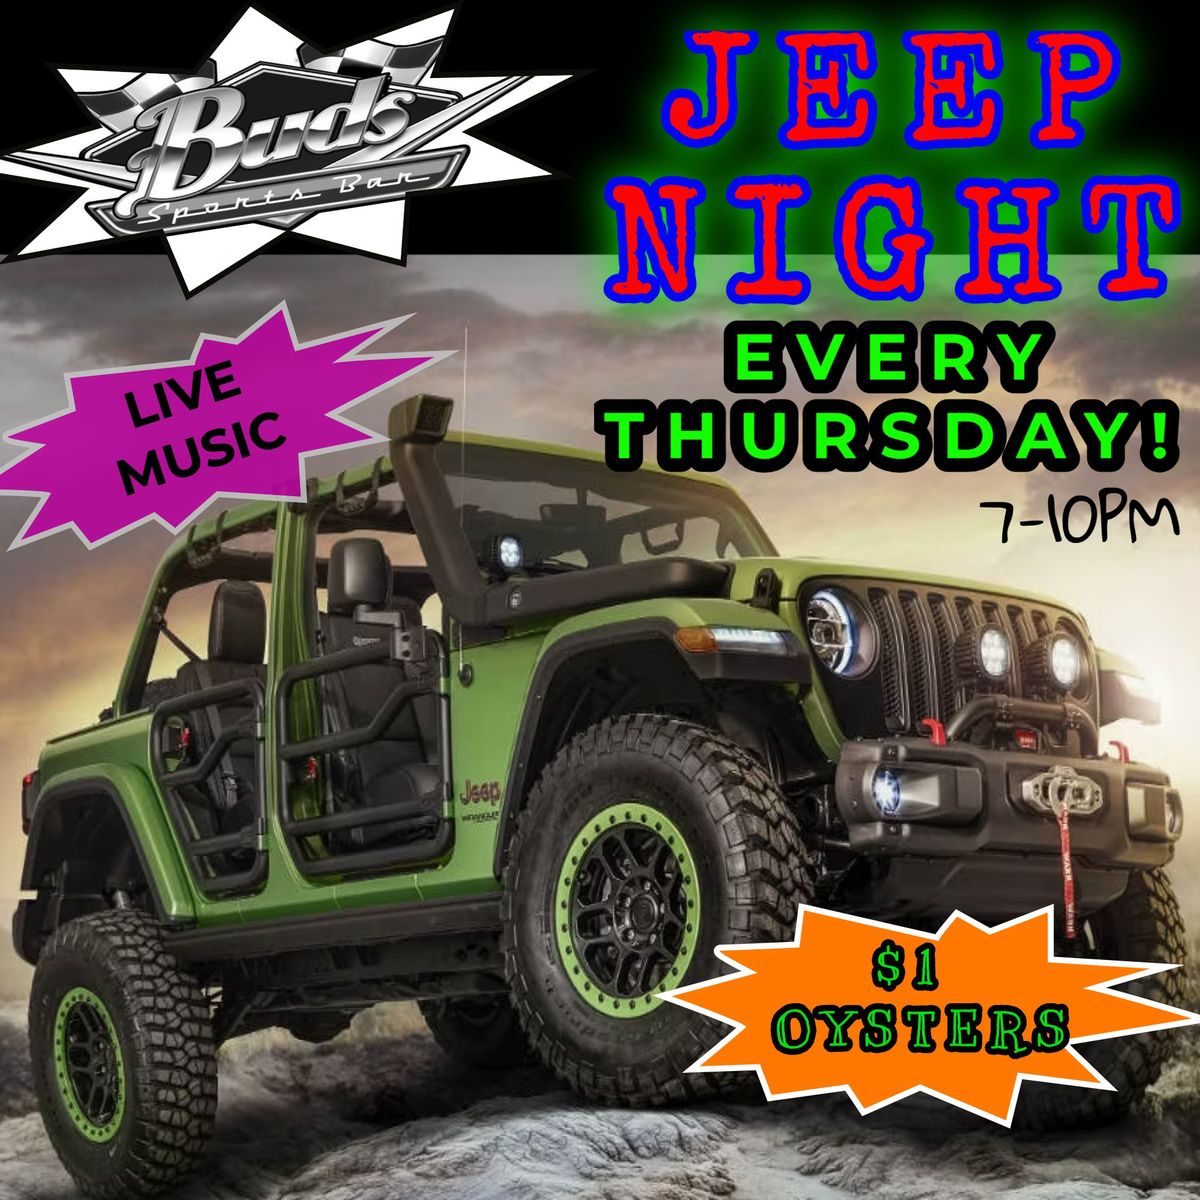 JEEP NIGHT @ BUDS EVERY THURSDAY! 